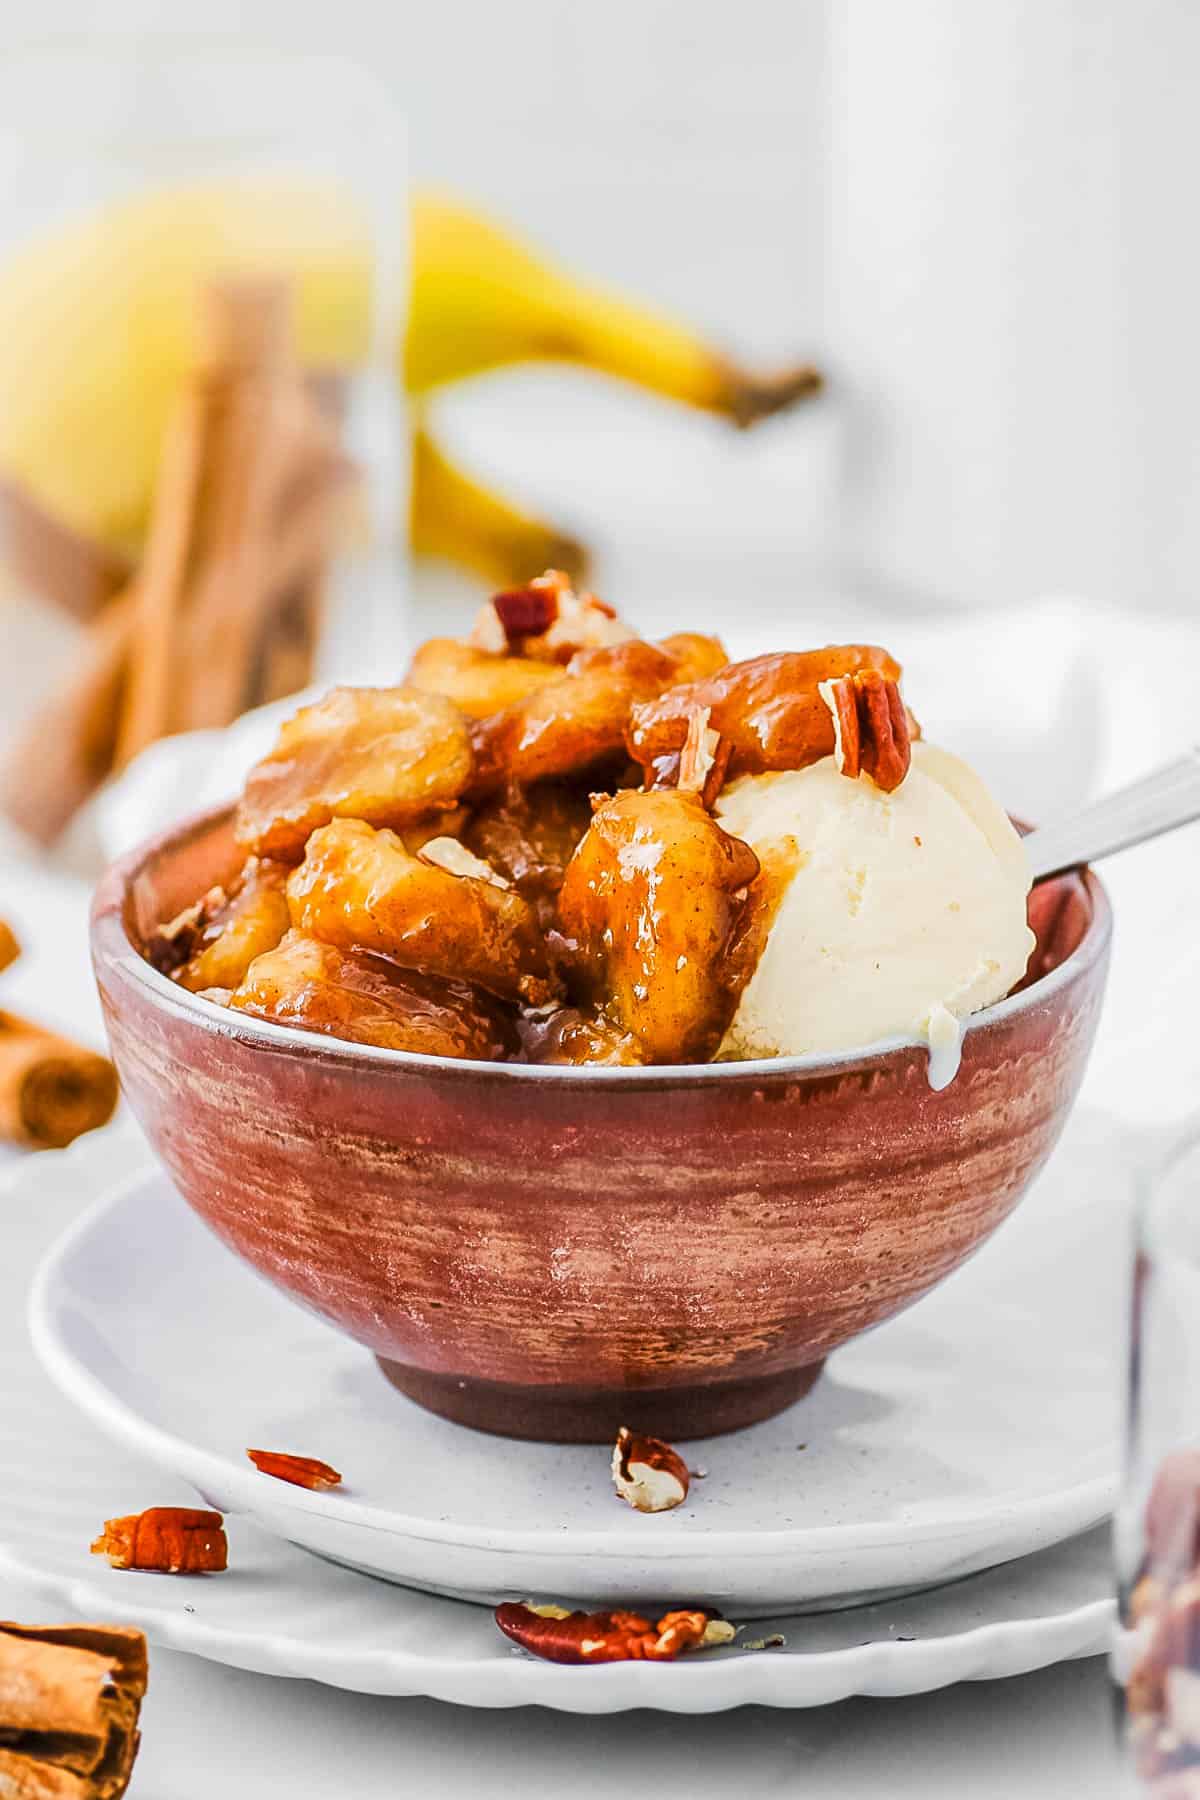 Caramelized bananas served with ice cream in a bowl.